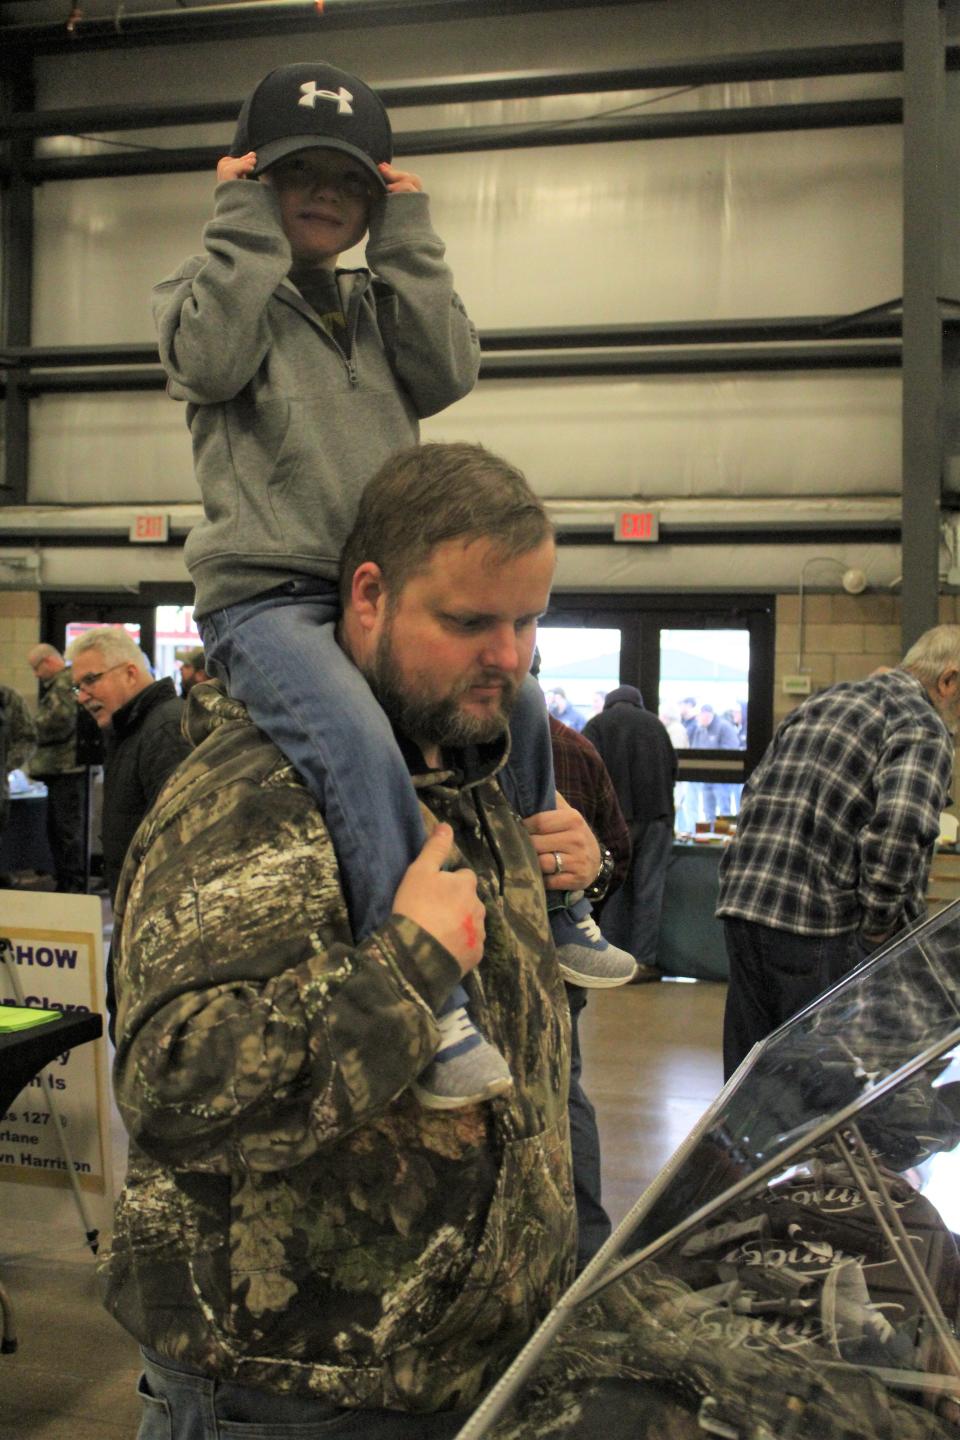 Monroe resident William Muncy and his three-year-old son, Lincoln, spent Saturday morning walking around and looking at things at the Monroe Gun & Knife Show.